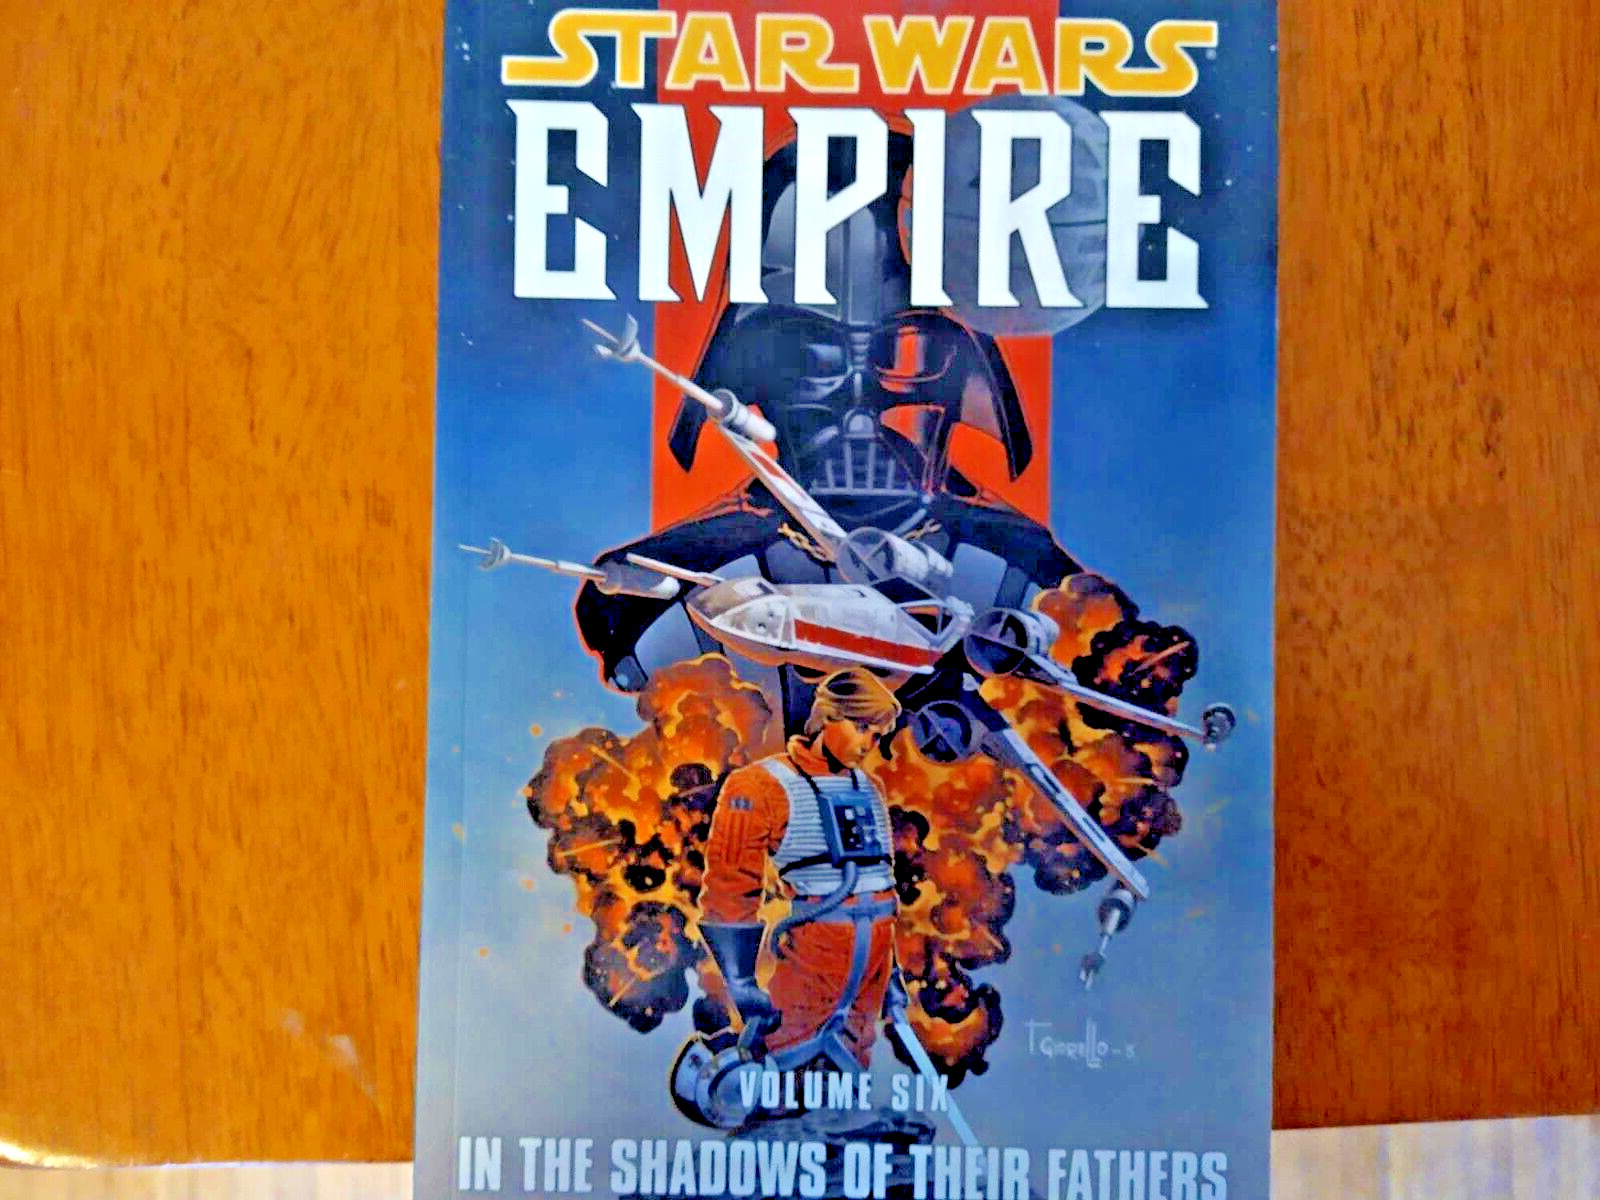 Star Wars Empire Vol 6 Shadows of Their Fathers  Graphic Novel Trade paperback